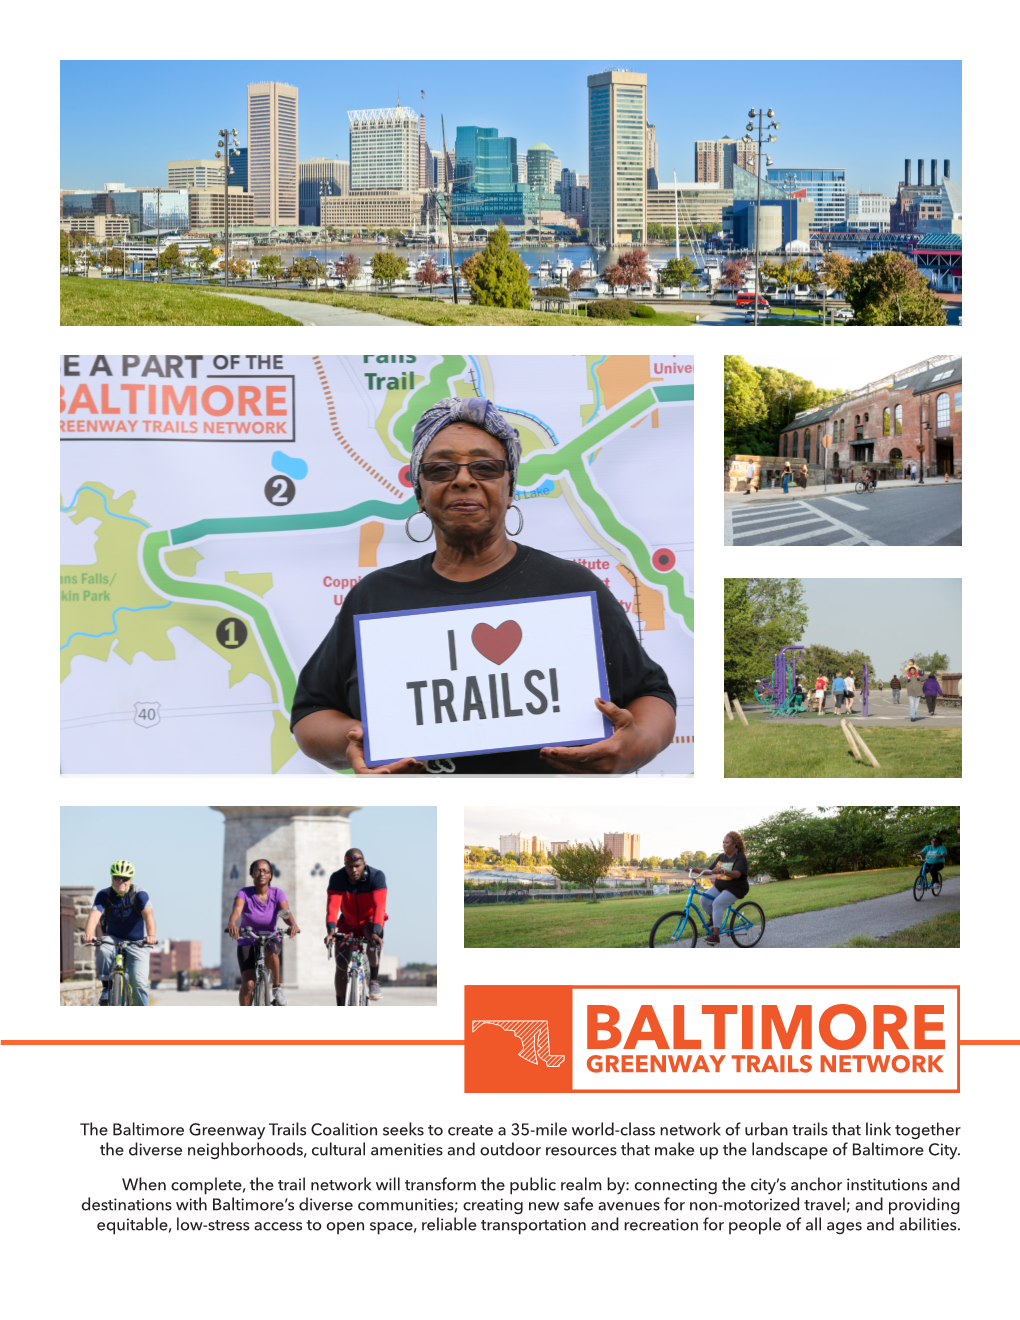 The Baltimore Greenway Trails Coalition Seeks to Create a 35-Mile